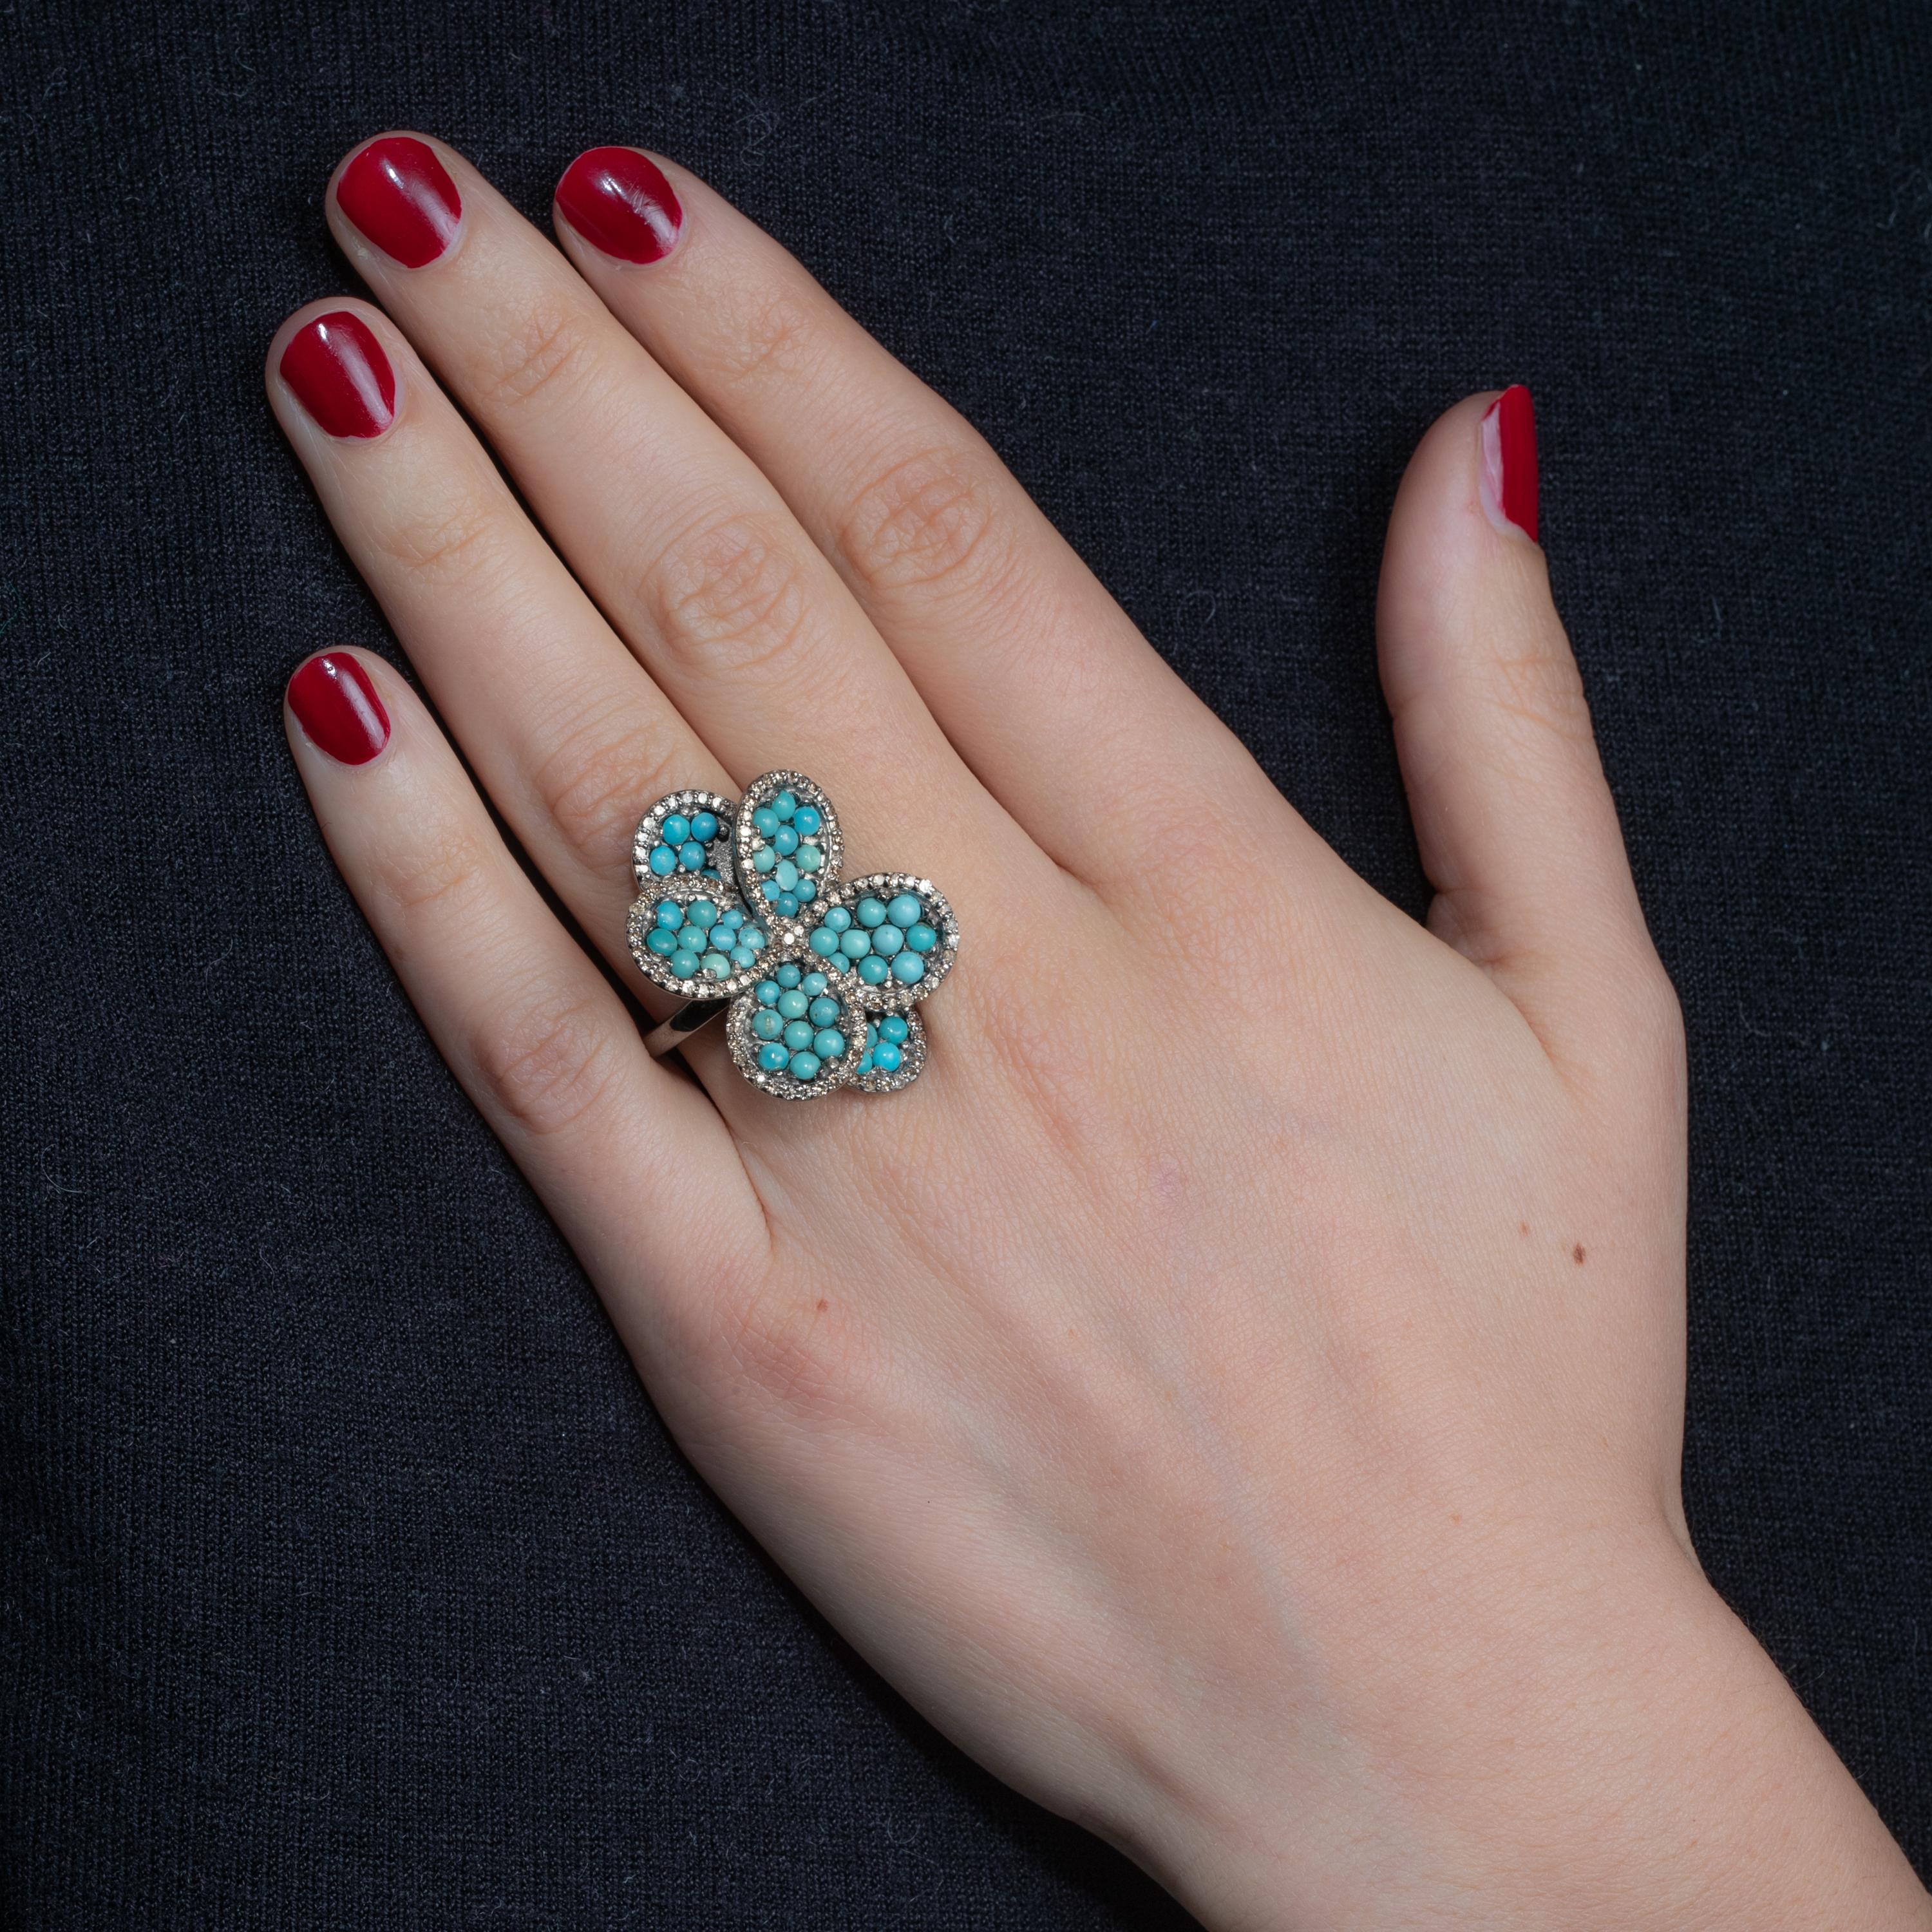 A flower petal ring of round turquoise stones bordered with pave`-set diamonds.  Set in an oxidized sterling silver.  Carat weight of turquoise is 4.47 carats, diamonds total 1.12 carats.  Ring size is 7.